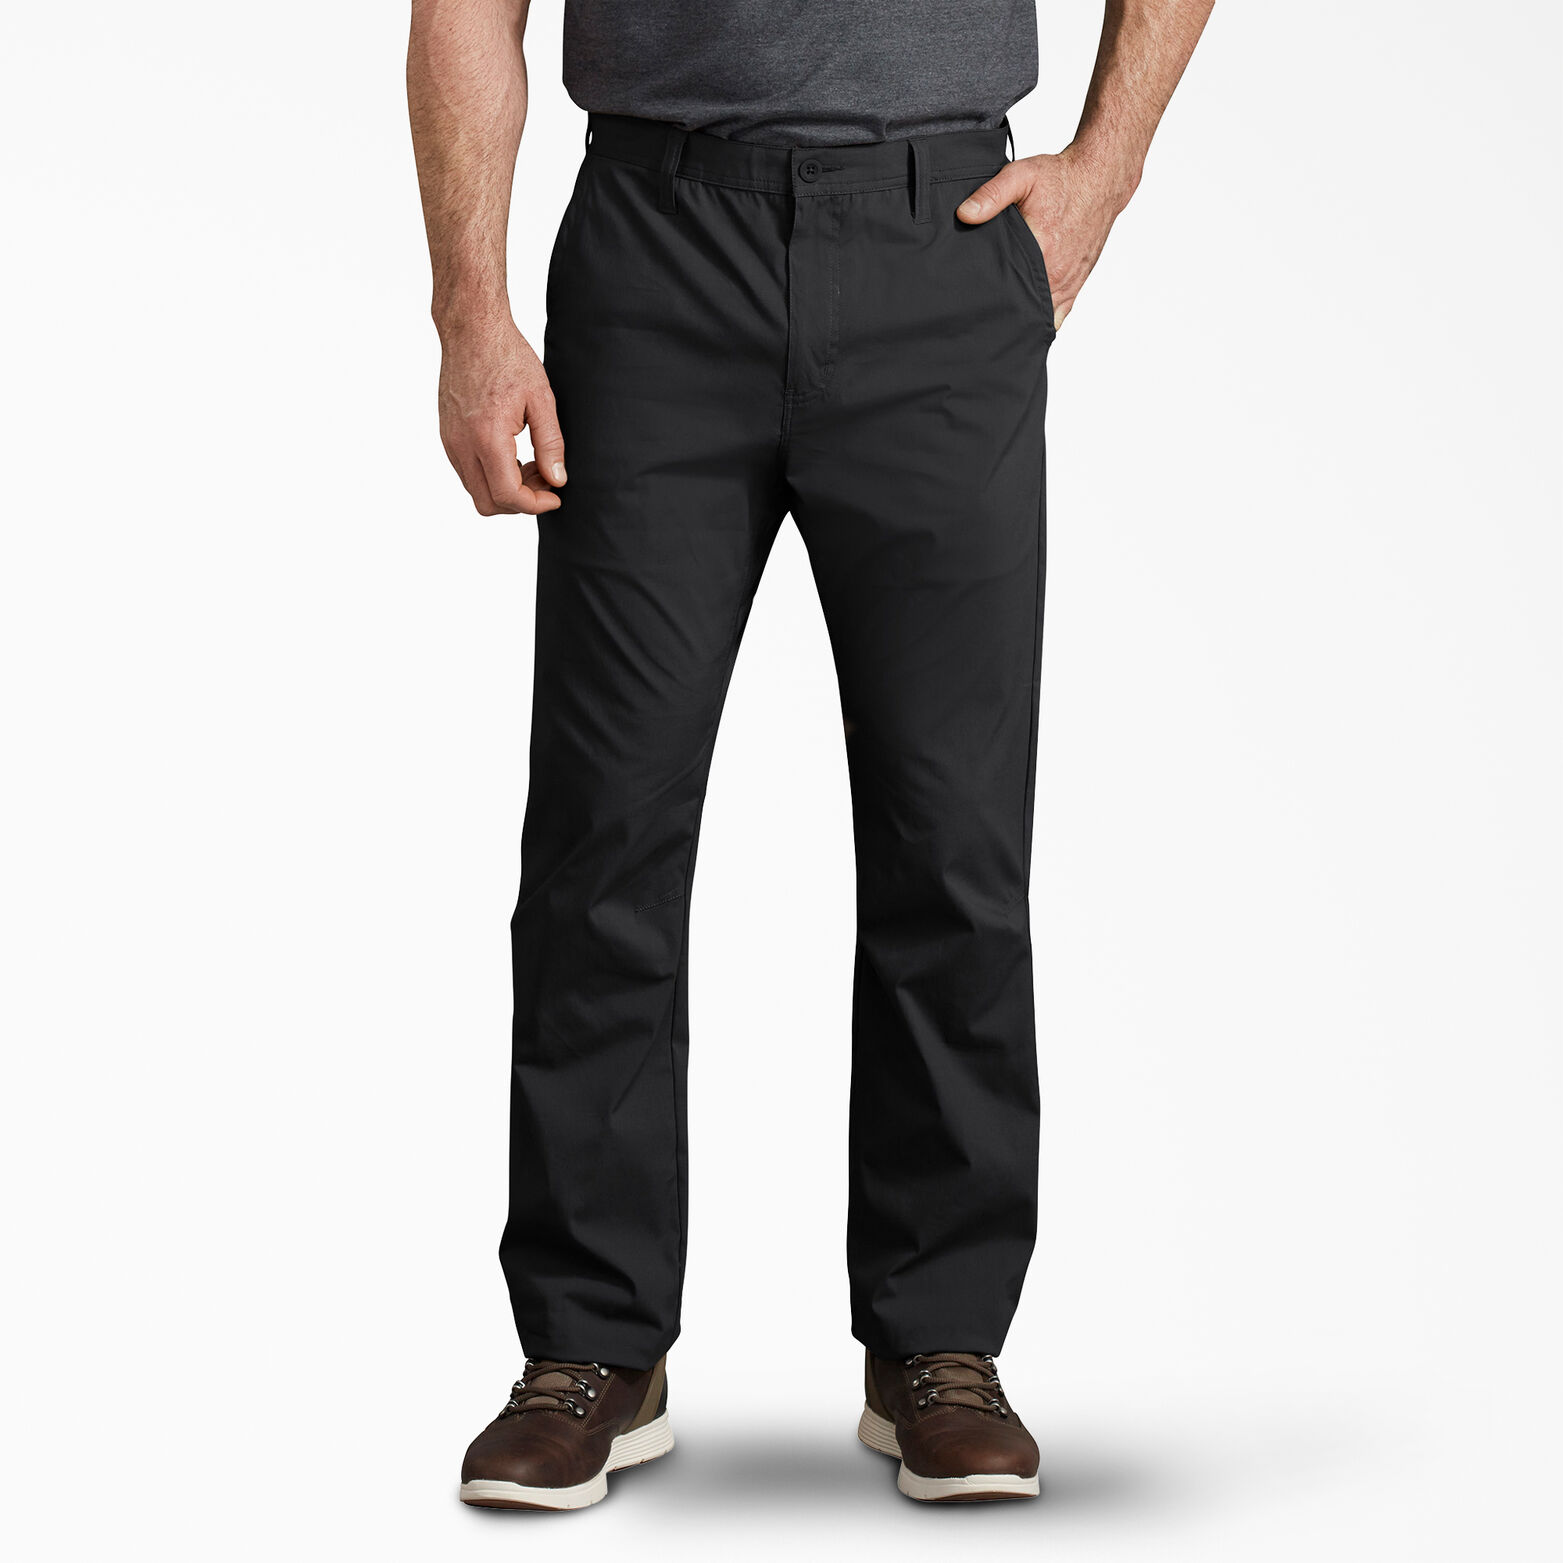 Relaxed Fit Pants - Dickies US